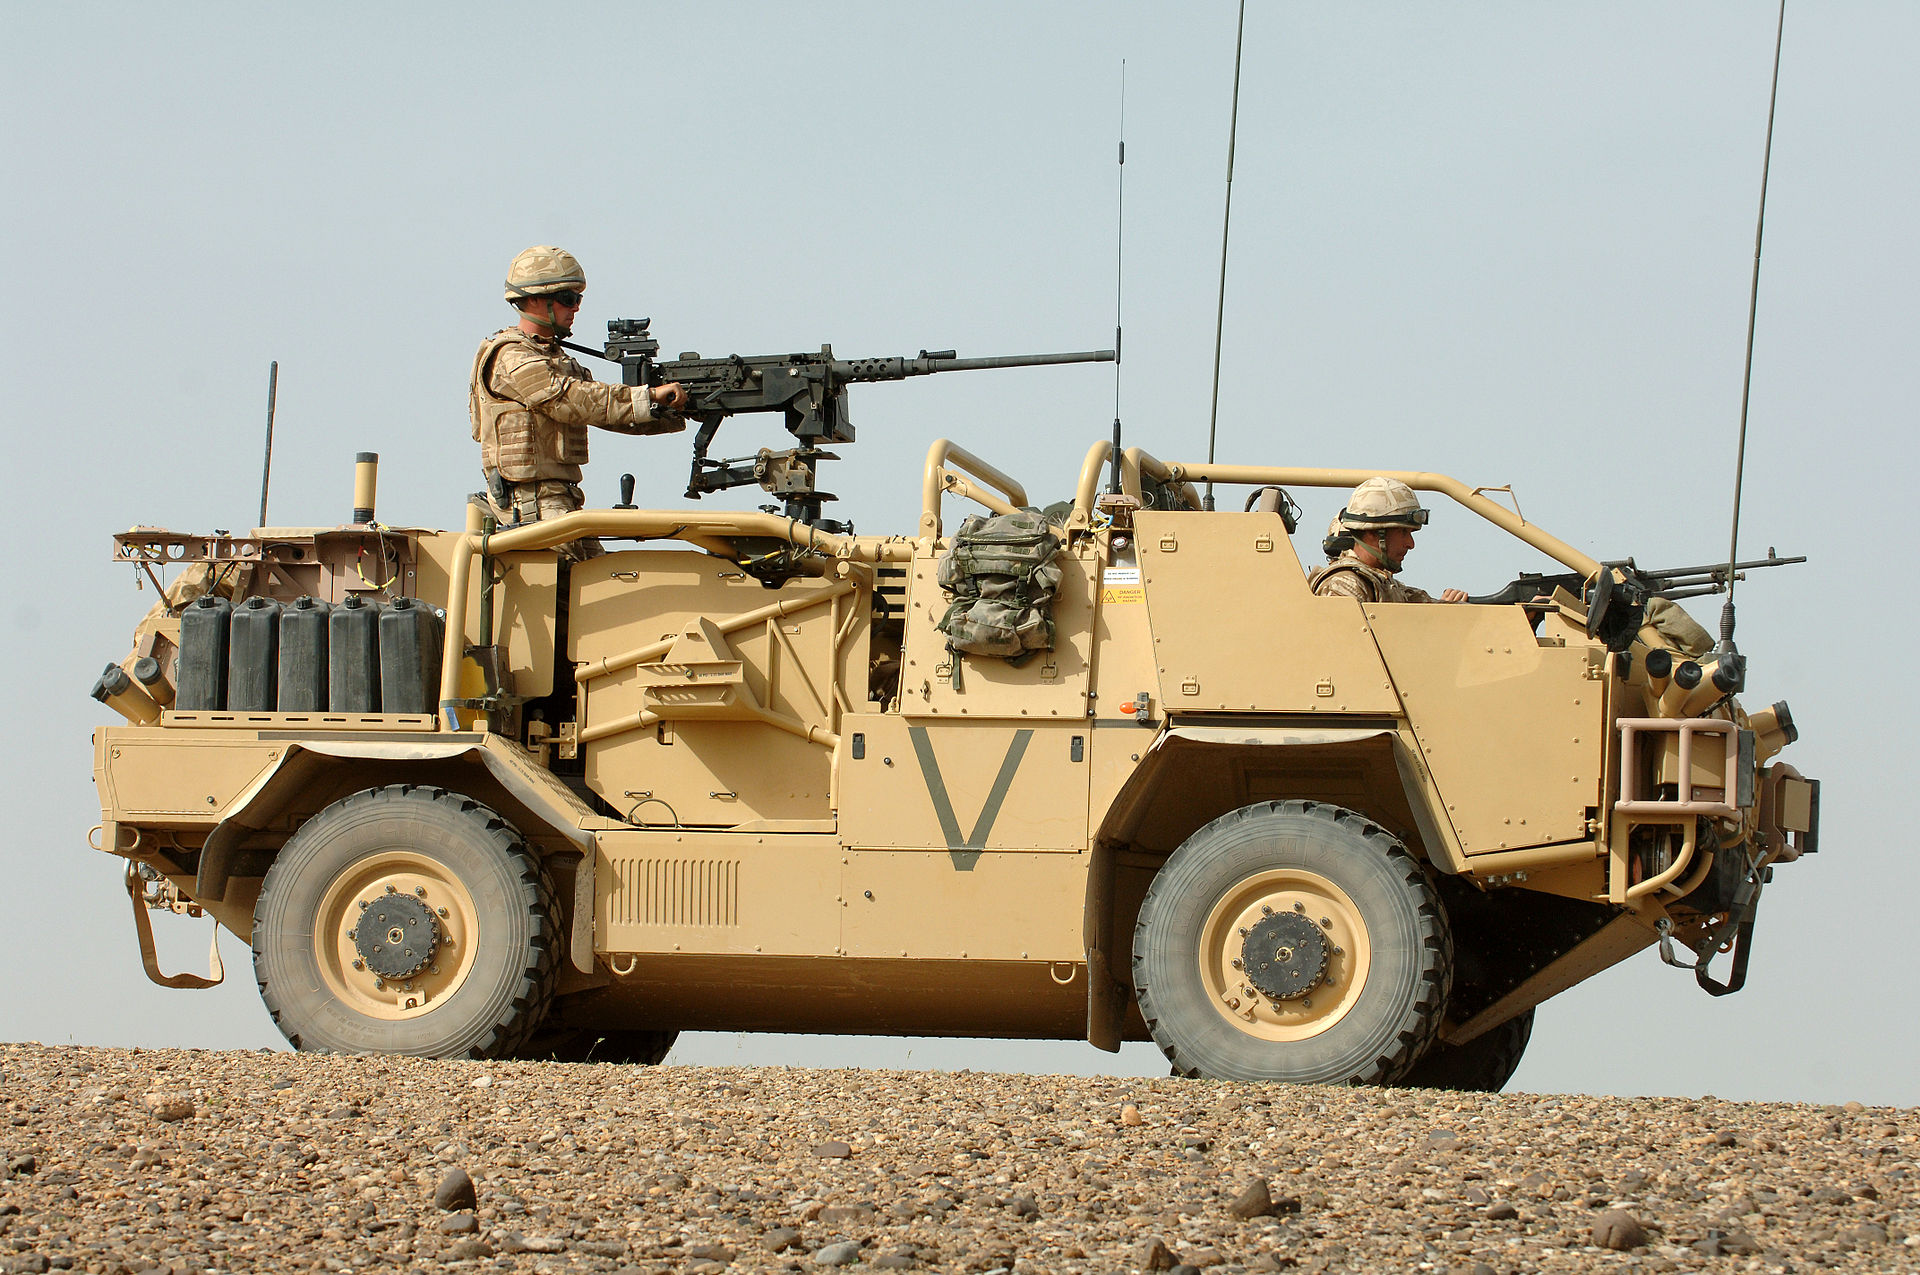 1920px-A_Jackal_Armoured_Vehicle_is_put_through_it%27s_paces_in_the_desert_at_Camp_Bastion%2C_Afghanistan_MOD_45148137.jpg